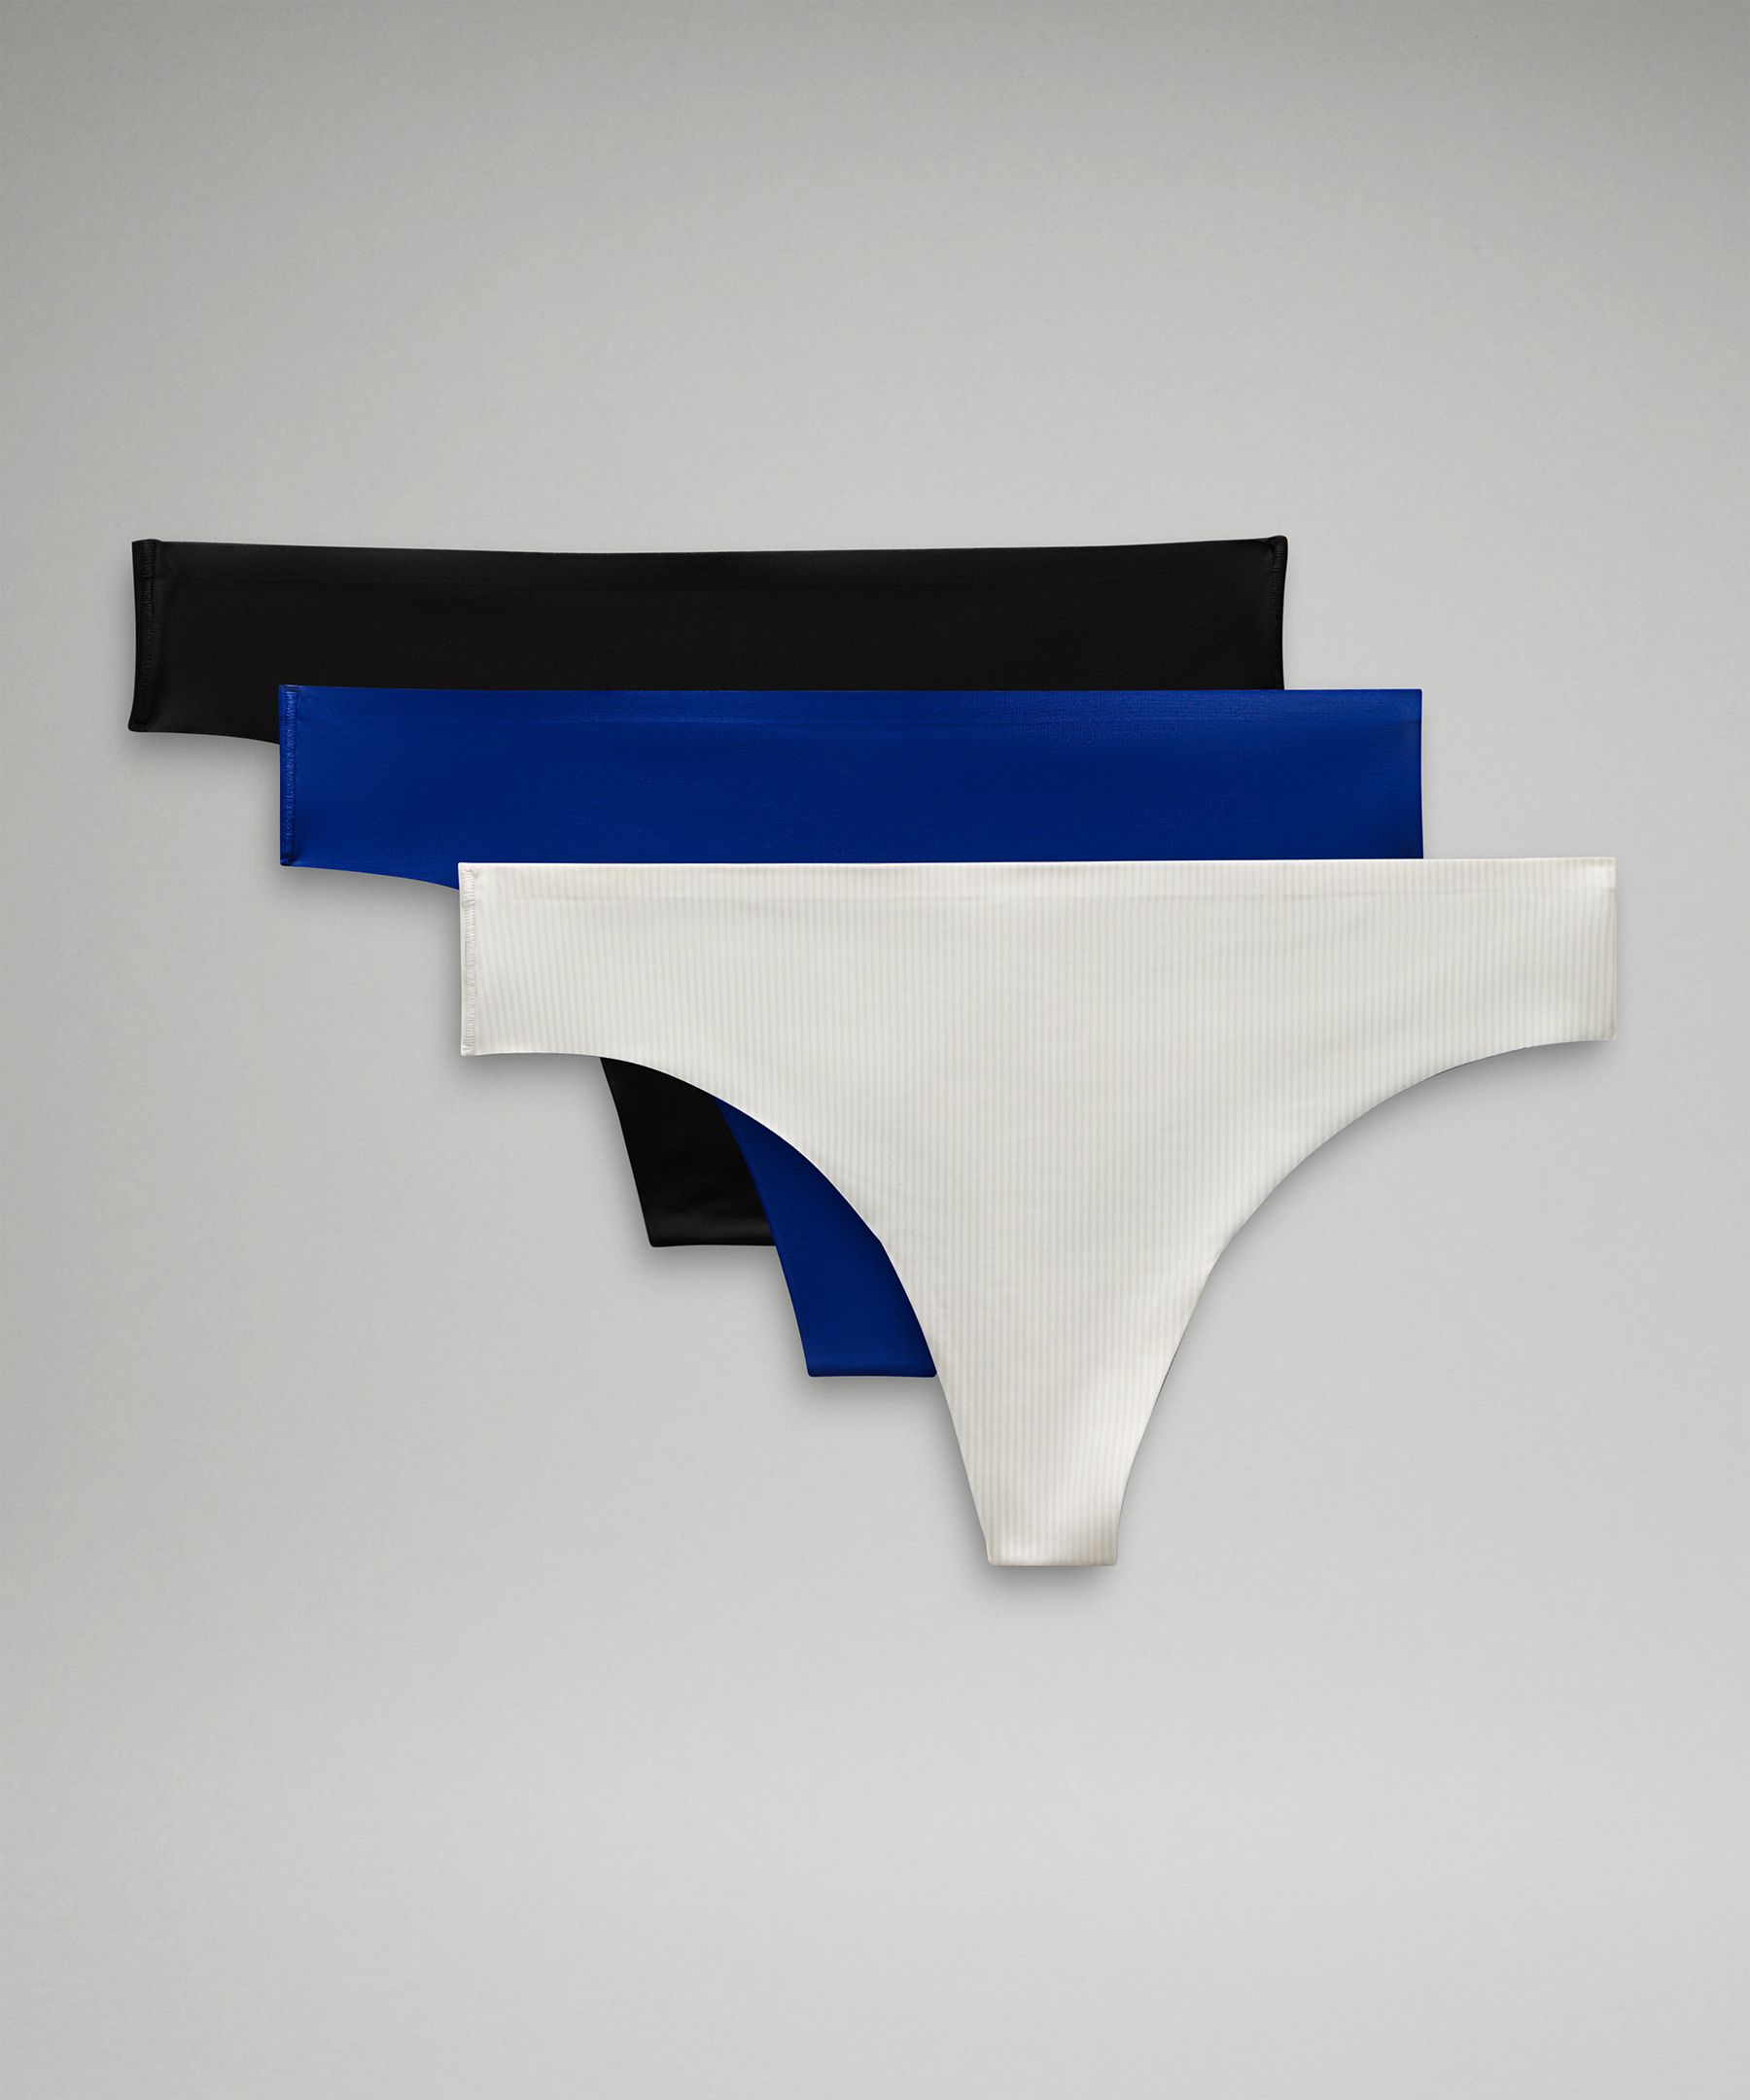 Lululemon Invisiwear Mid-rise Thong Underwear 3 Pack In Blue